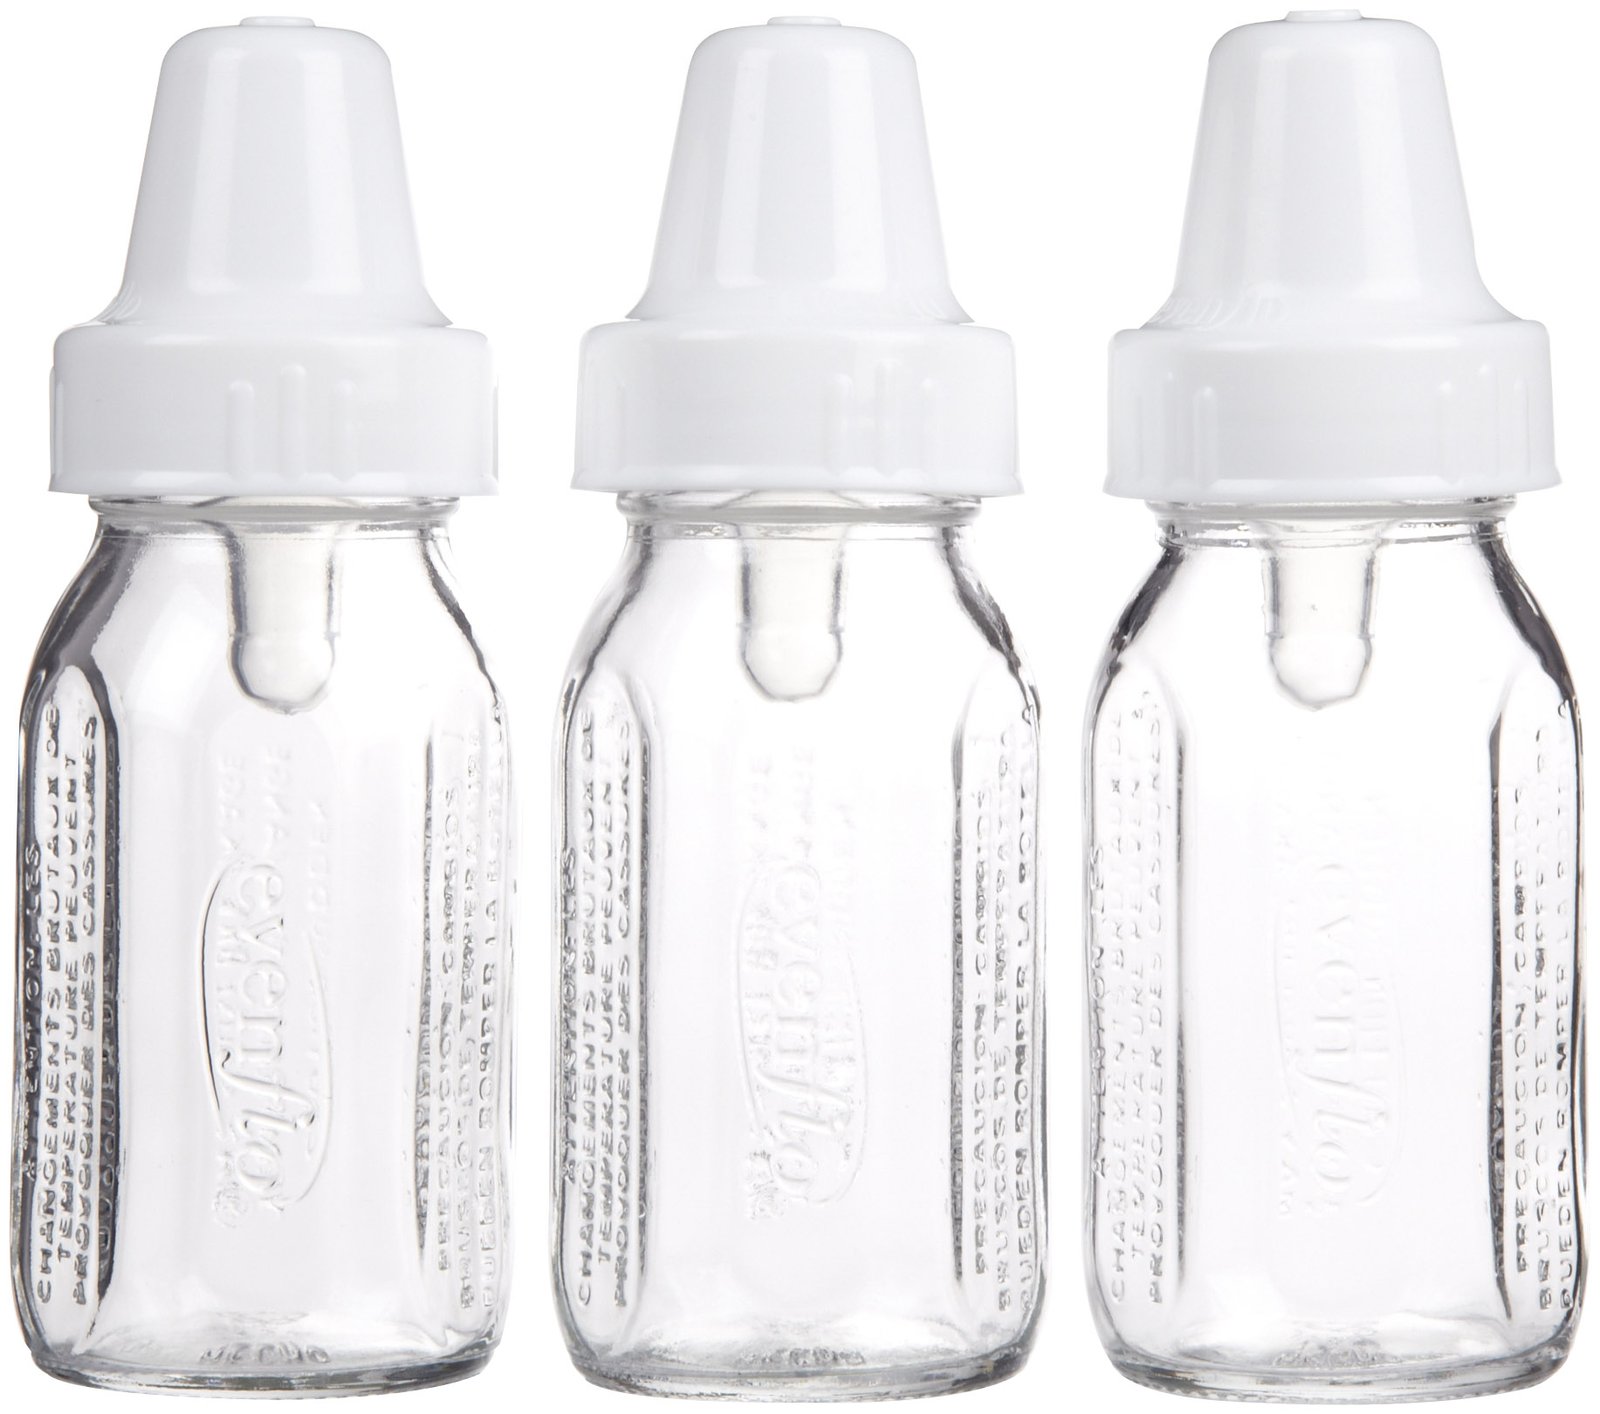 Evenflo Classic Glass Bottles 3PK 120ml 4oz-Controlled Flow of ...